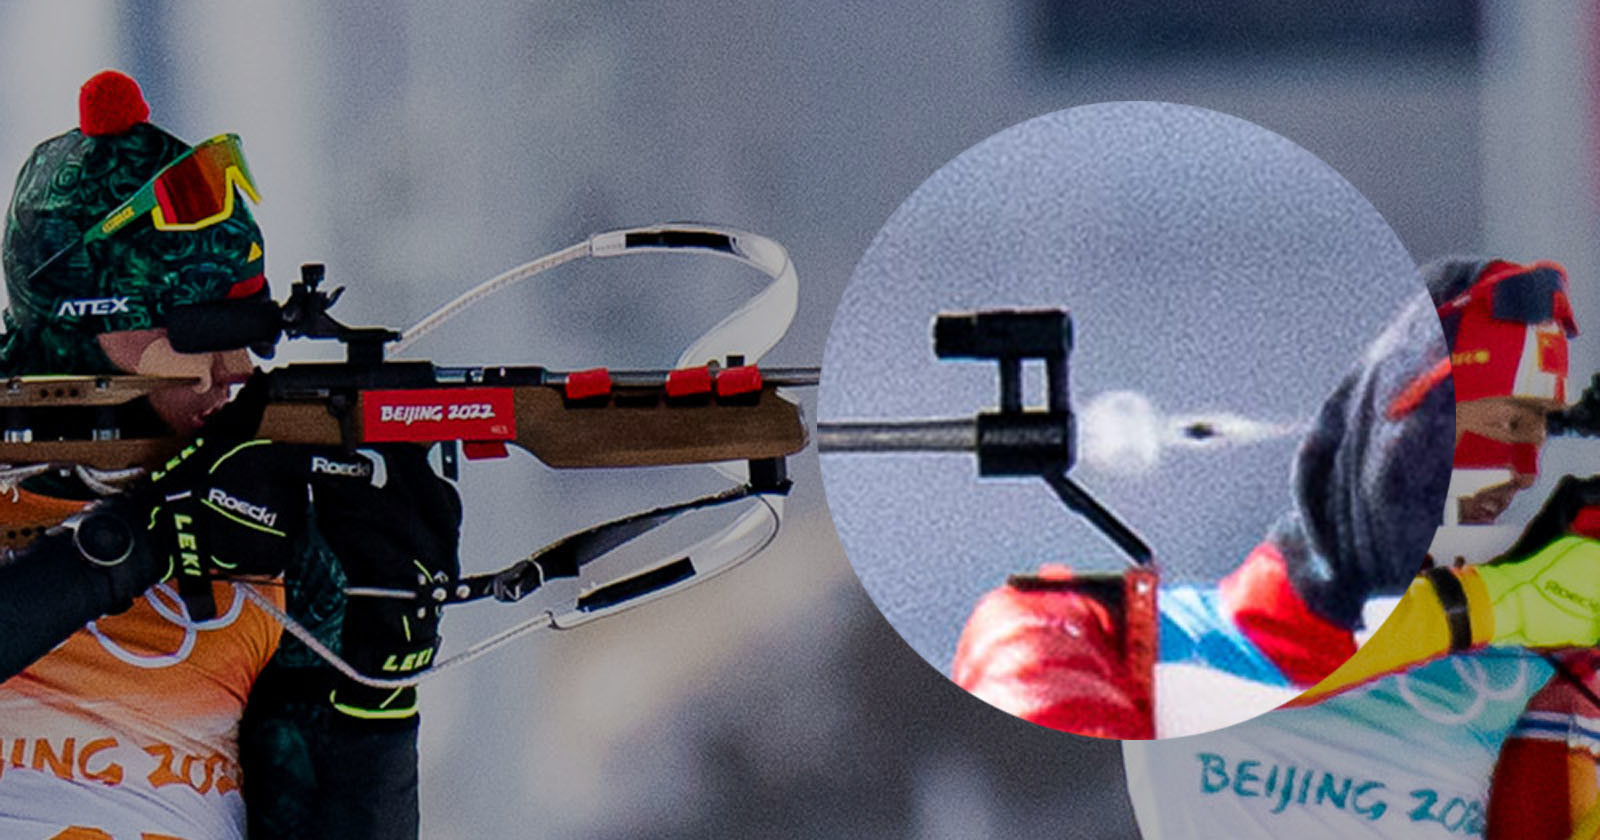 Olympic Photographer Catches Bullets in Mid-Air with the Sony Alpha 1